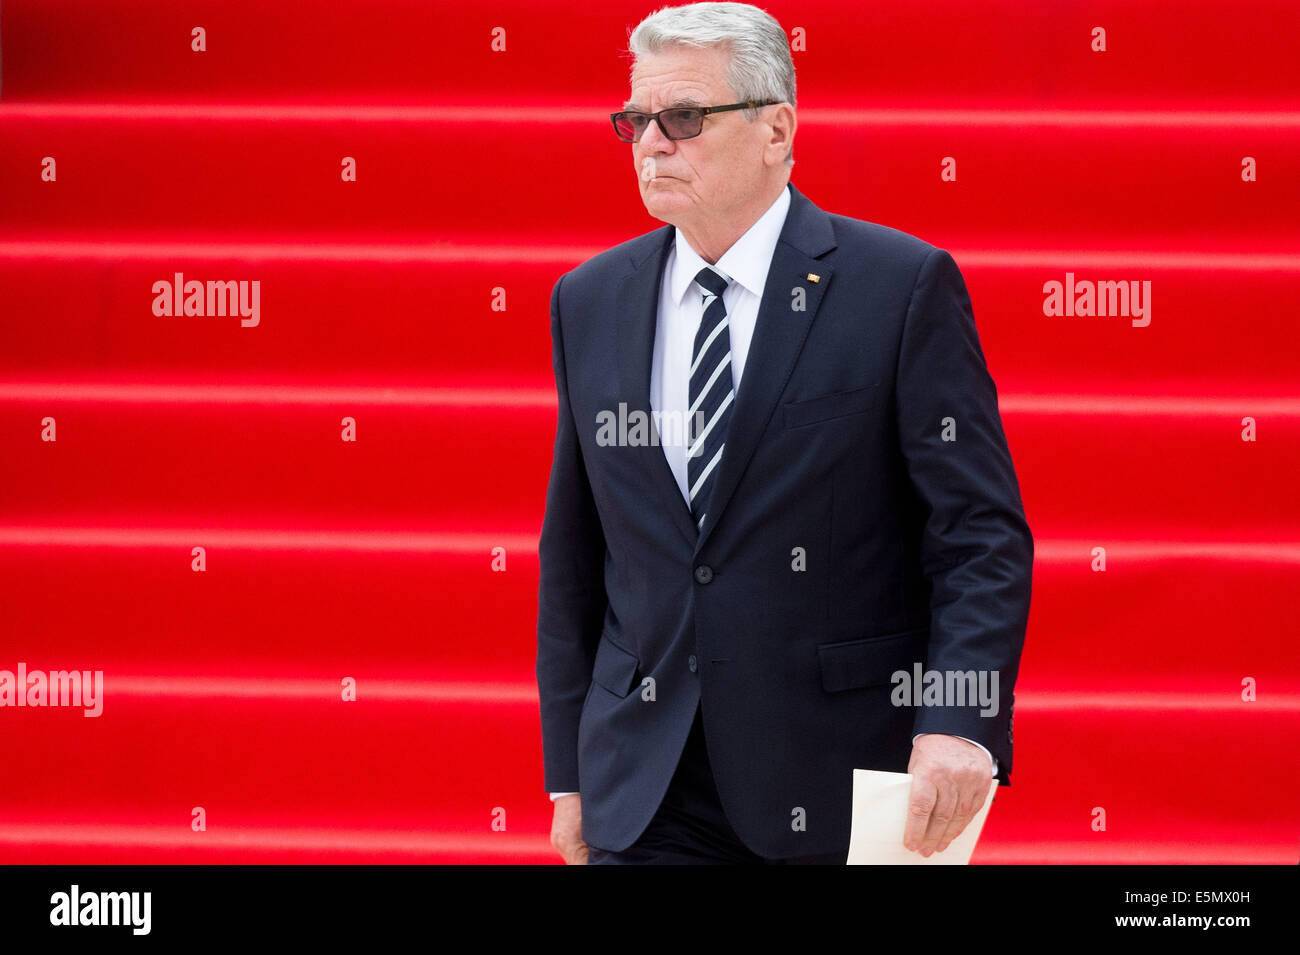 Liege, Belgium. 04th Aug, 2014. German President Joachim Gauck attends the international memorial ceremony for the 100th anniversary of the beginning of the First World War in Liege, Belgium, 04 August 2014. The year 2014 sees the 100th anniversary of the beginning of WWI, or the Great War, which according to official statistics cost more than 37 million military and civilian casualties between 1914 and 1918. Photo: Maurizio Gambarini/dpa/Alamy Live News Stock Photo